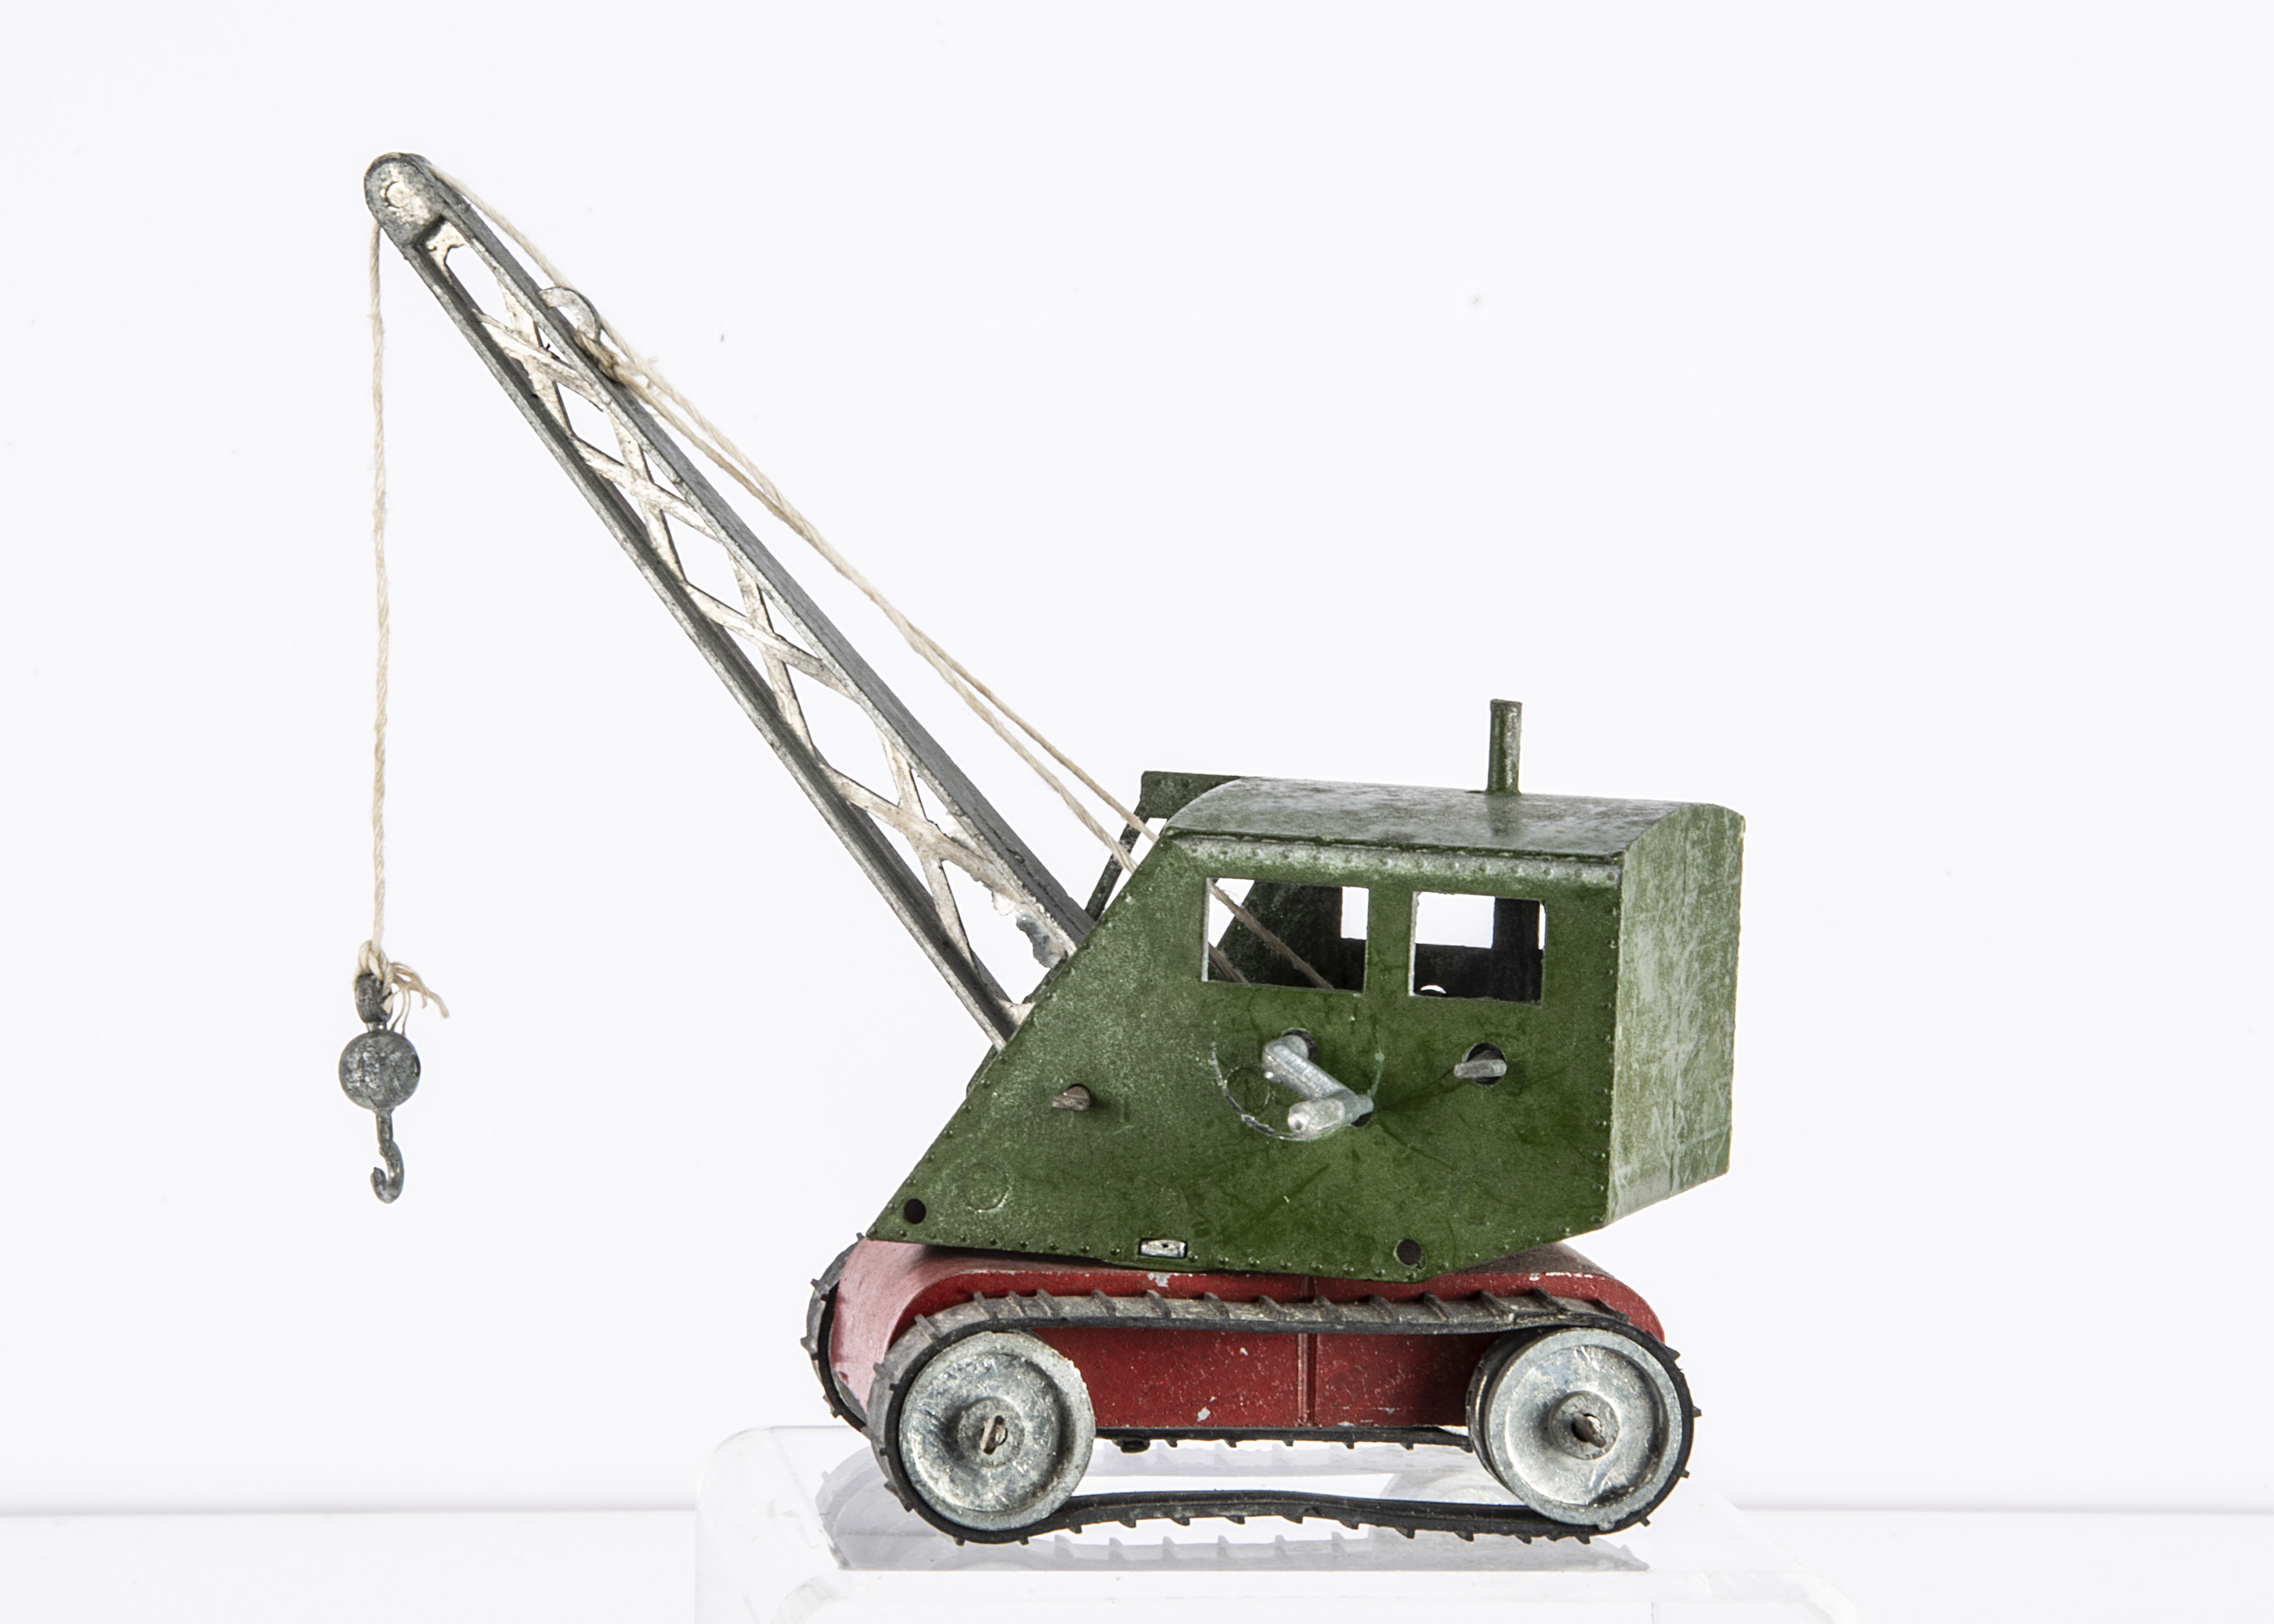 A Teeny Toy (Cleveland Toy Manufacturing) Mobile Crane, dark green cab, red base, bare metal jib,